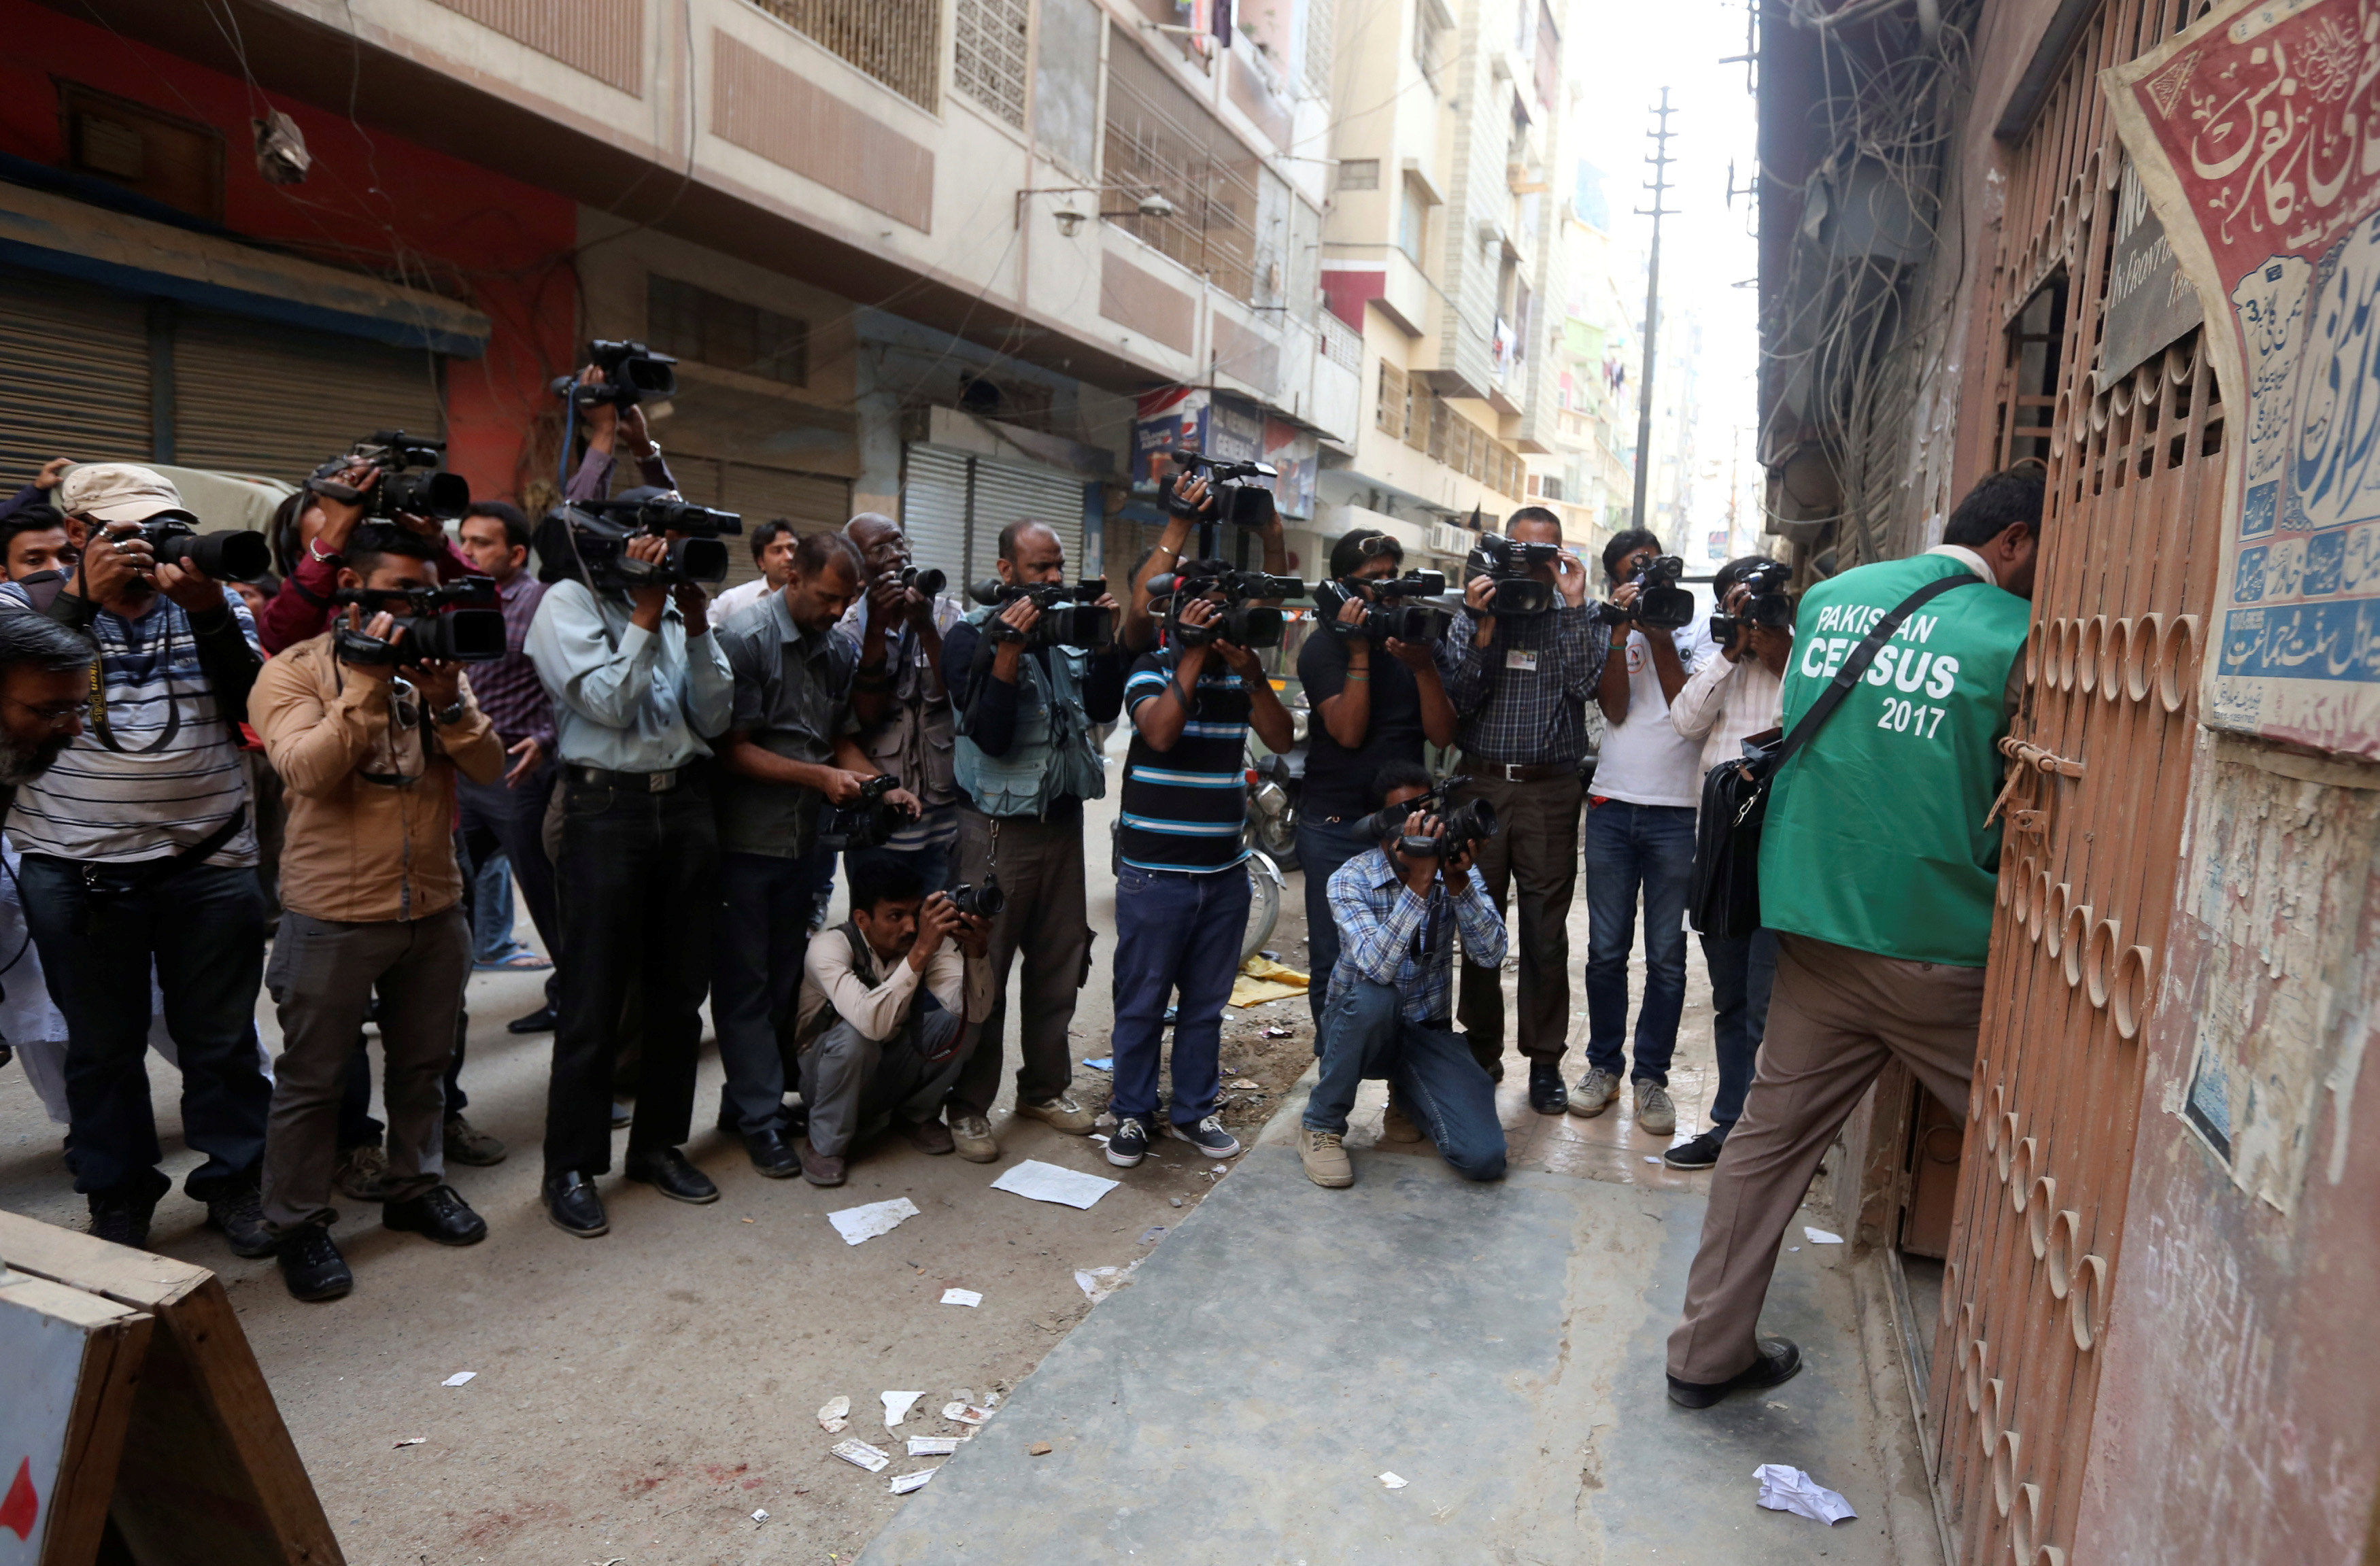 Cameramen and photographers document as a census enumerator (R) enters in a building during Pakistanâs 6th population census in Karachi. PHOTO: REUTERS